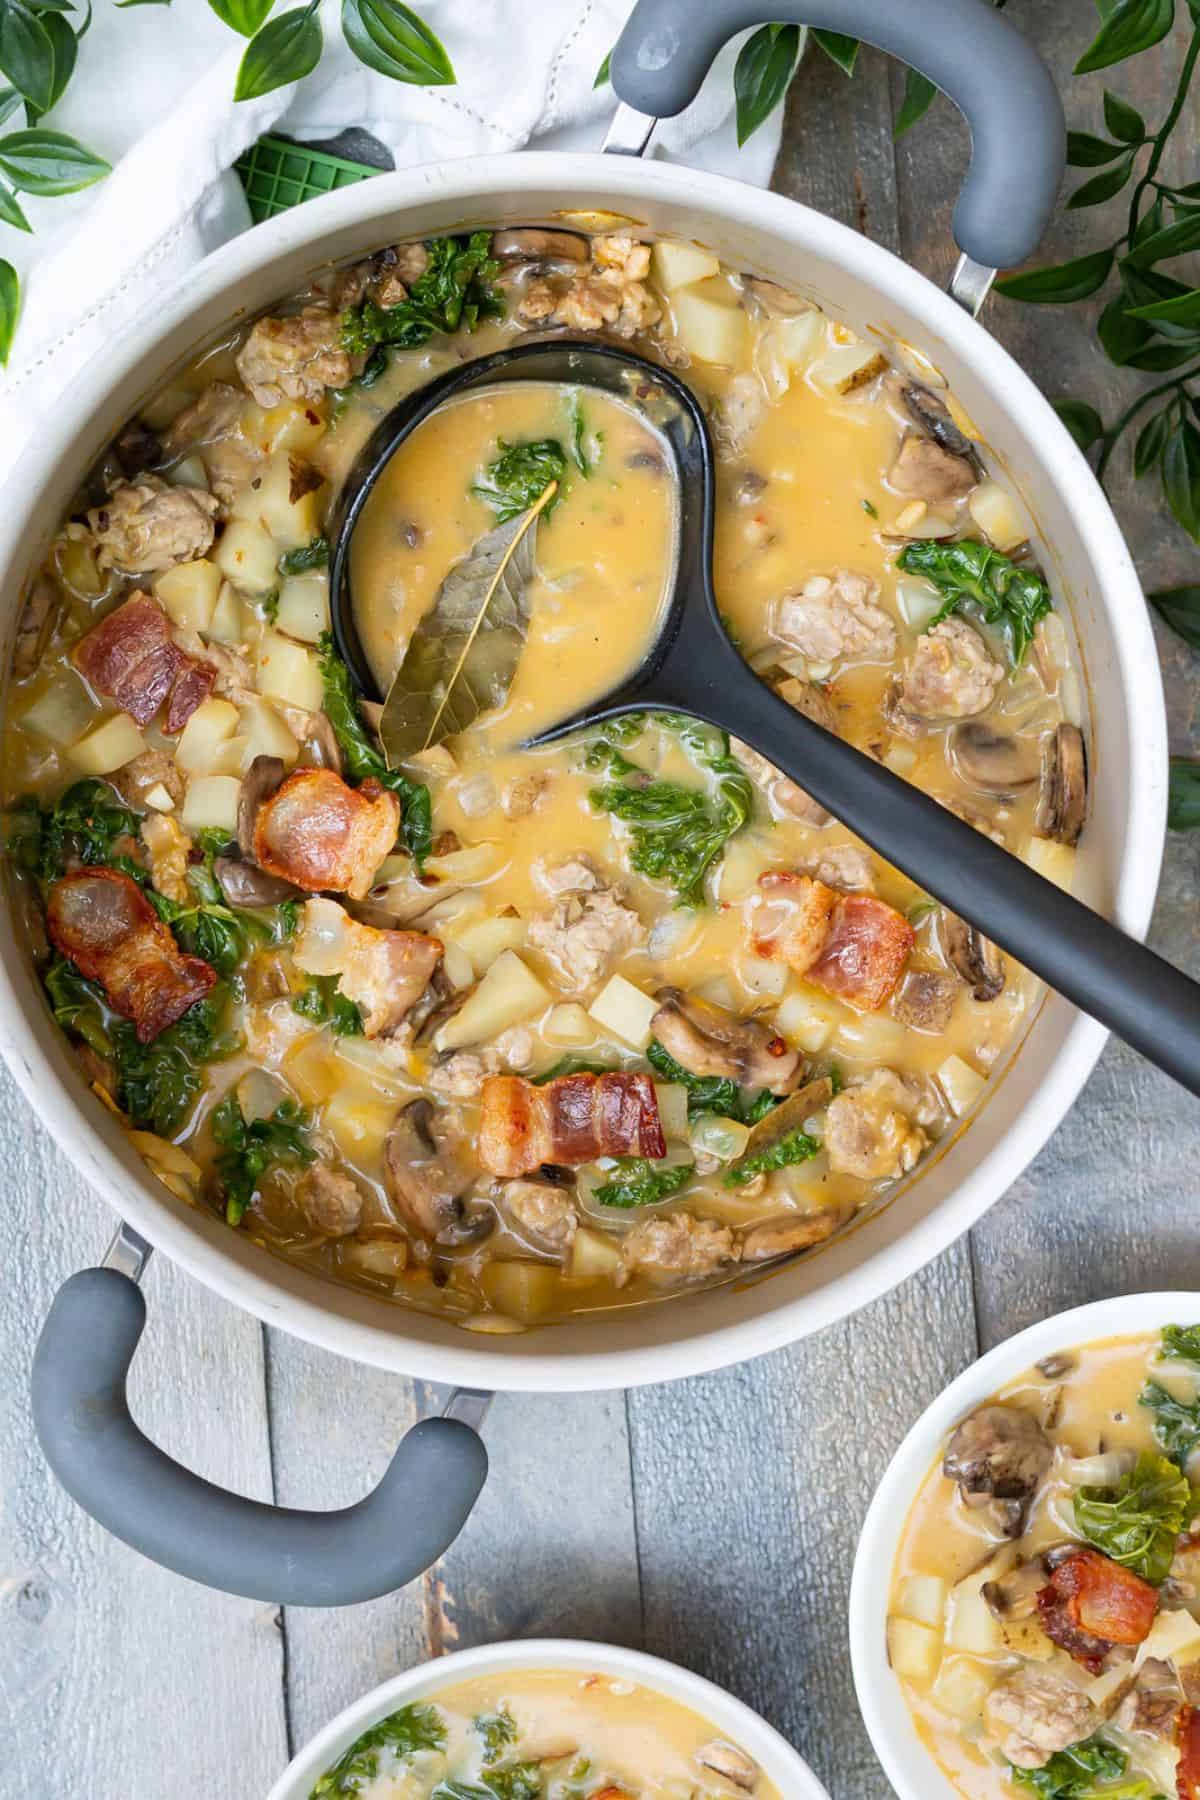 A pot and two serving bowls of healthy zuppa toscana with a savory coconut milk broth.